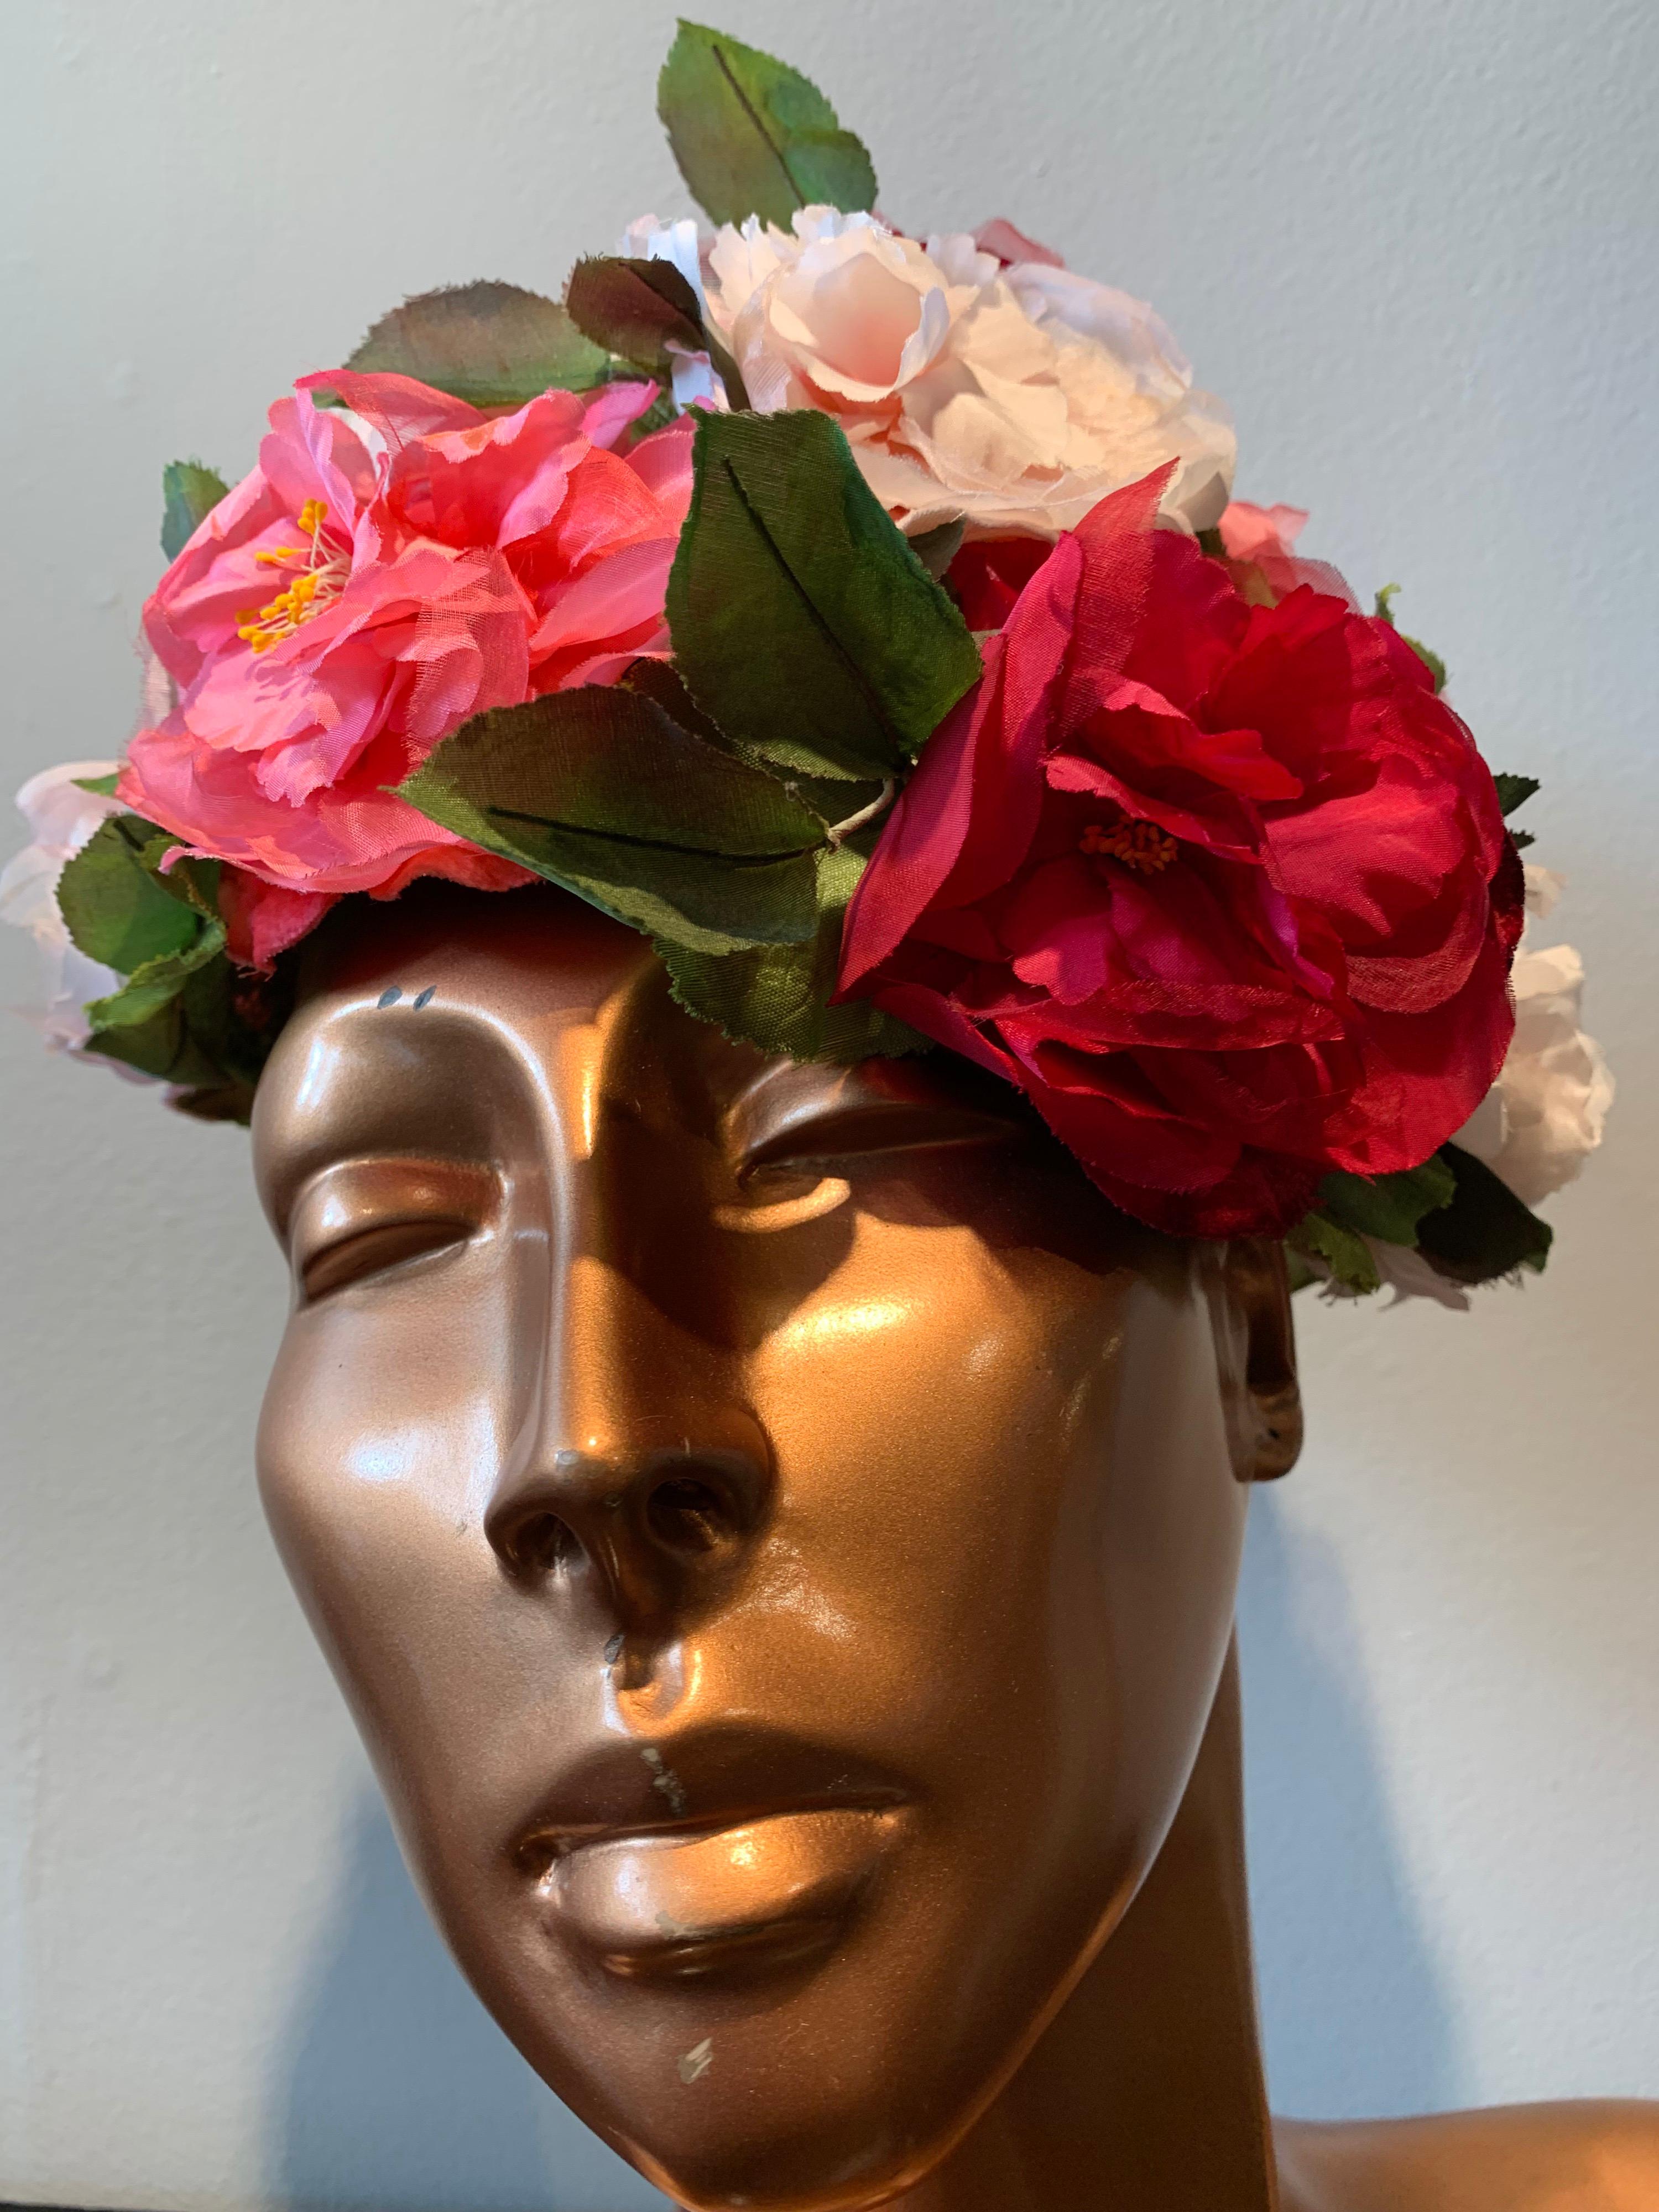 1950s Evelyn Varon Silk Summer Floral Flowerpot Shaped Structured Hat W/ Peonies. Brim edged in velvet. Base is an airy structured mesh. One size fits all.